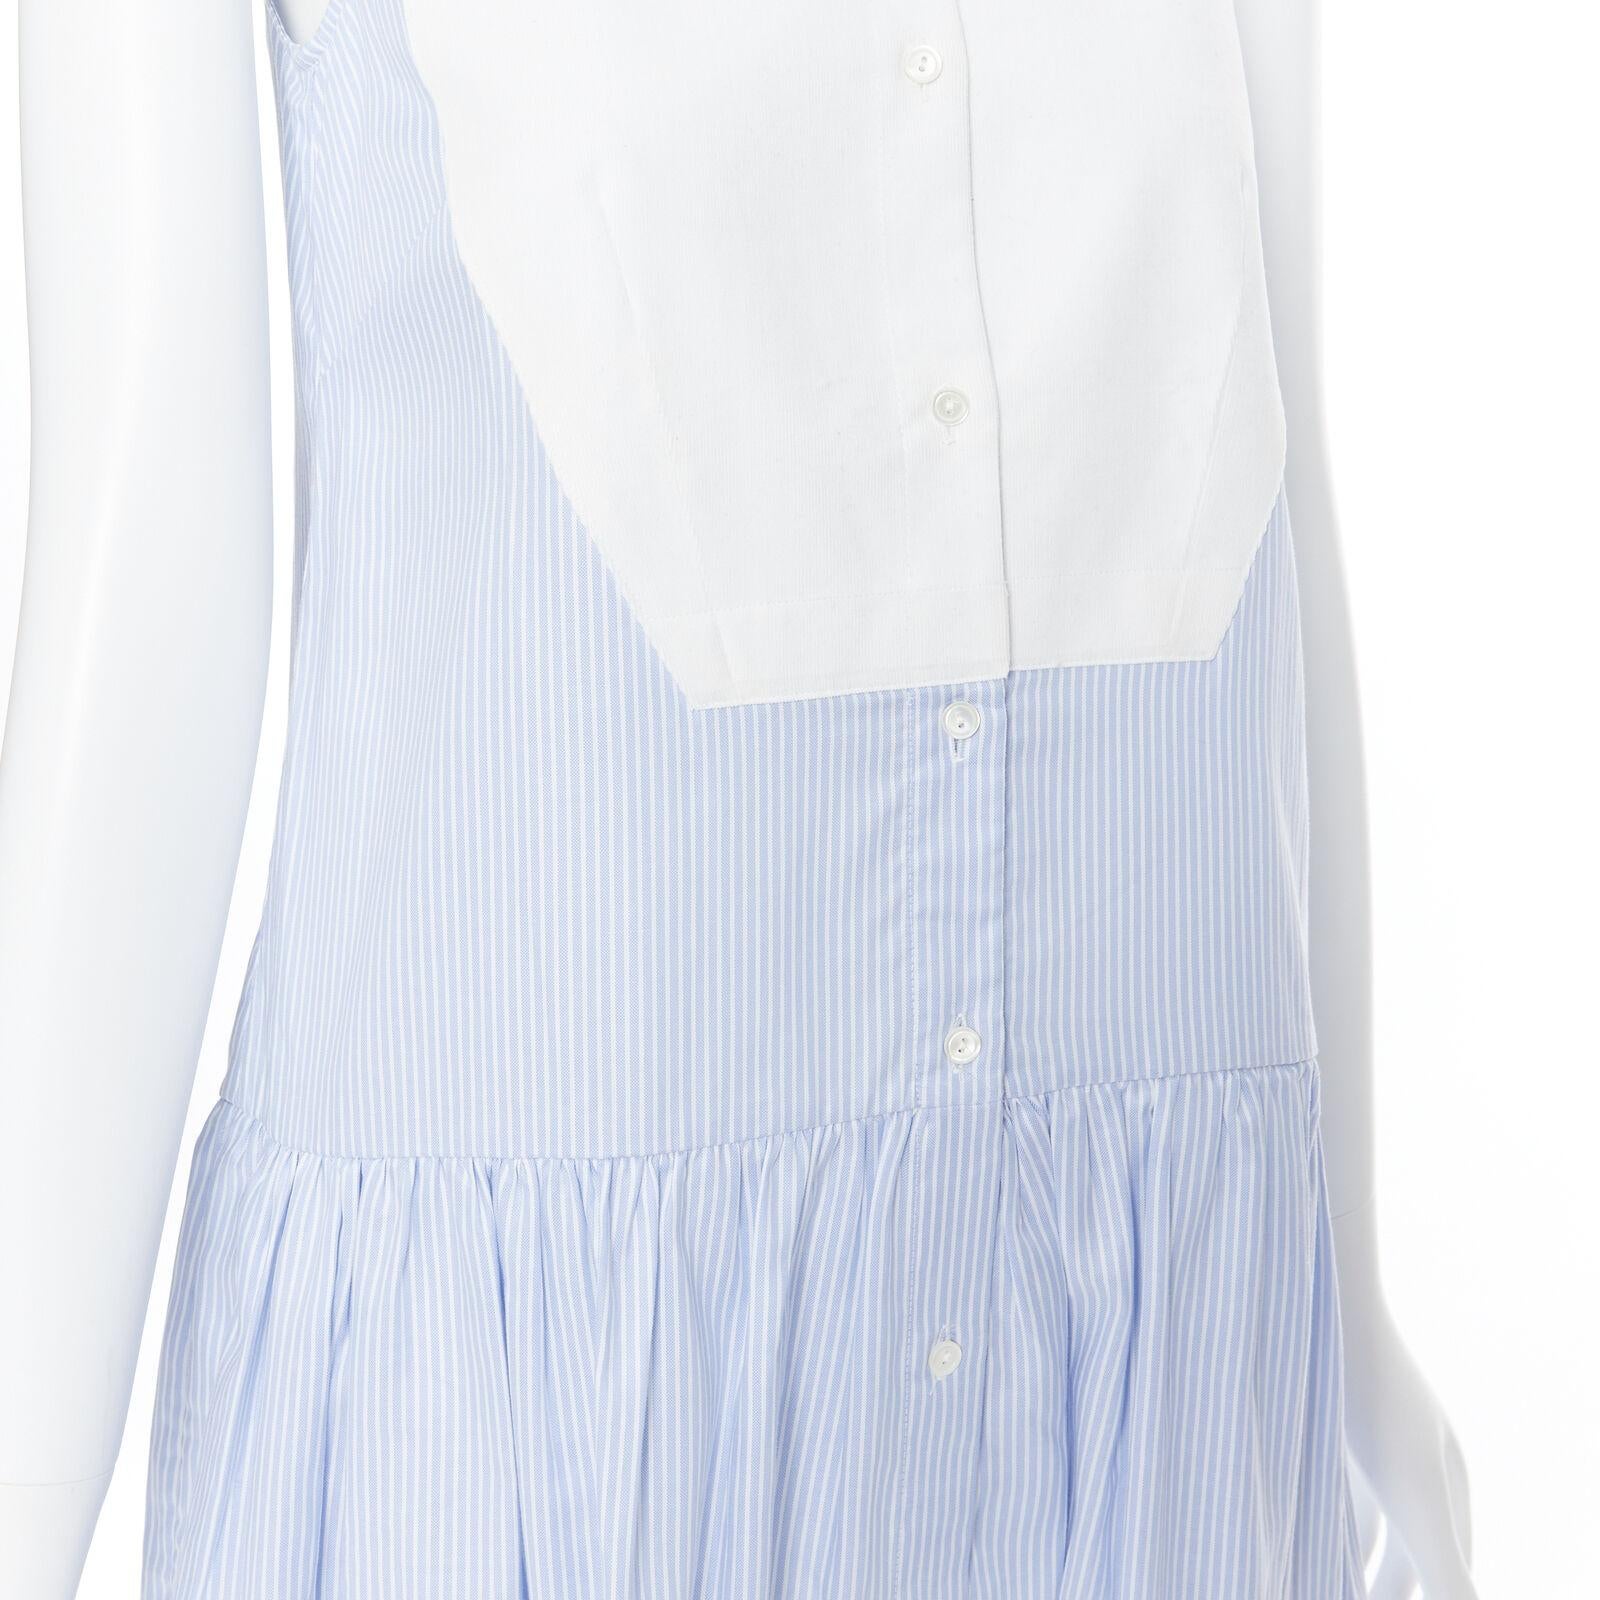 PALMER HARDING 100% cotton white bib front blue striped summer dress UK8 XS
Reference: SNKO/A00125
Brand: Palmer Harding
Material: Cotton
Color: Blue
Pattern: Striped
Closure: Button
Extra Details: Button front closure. Dart pleat at waist. Dropped